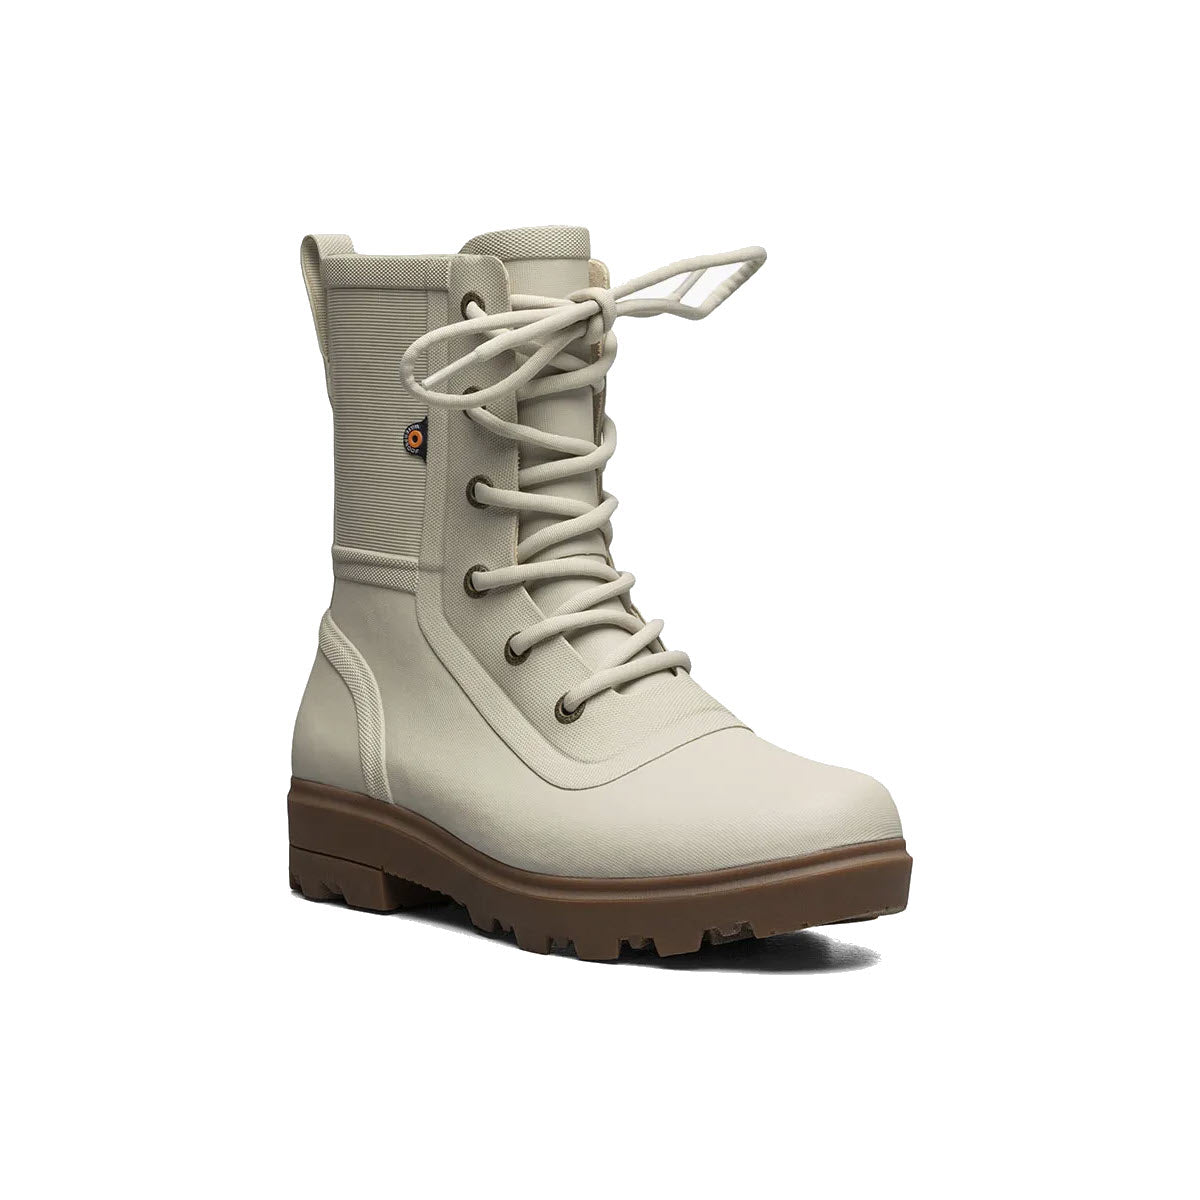 A single light gray combat-style boot with thick rubber soles and Bogs Algae footbeds on a white background.